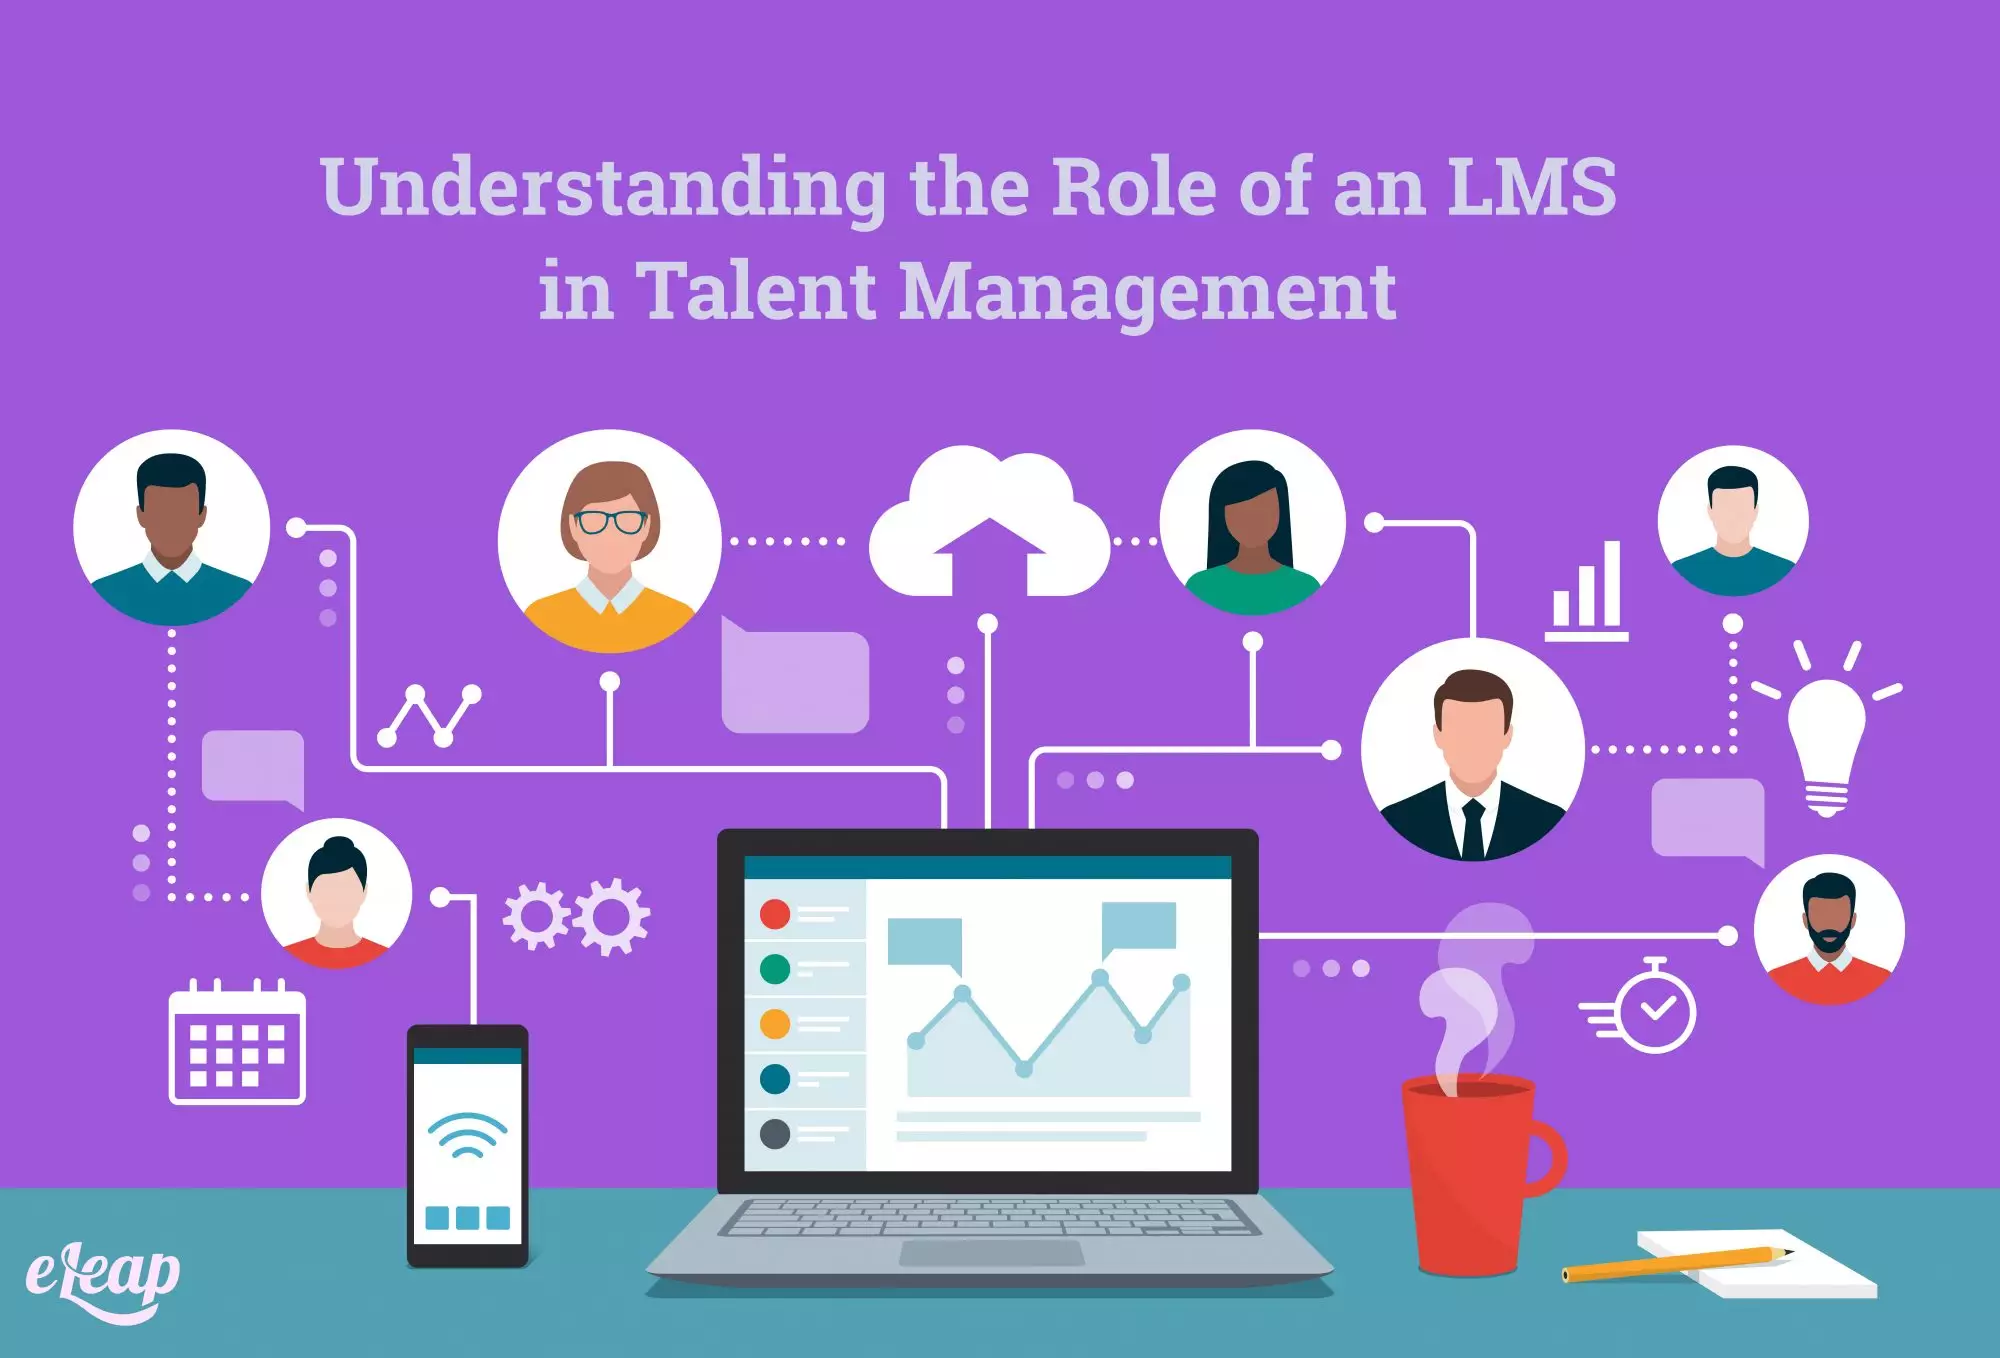 Understanding the Role of an LMS in Talent Management